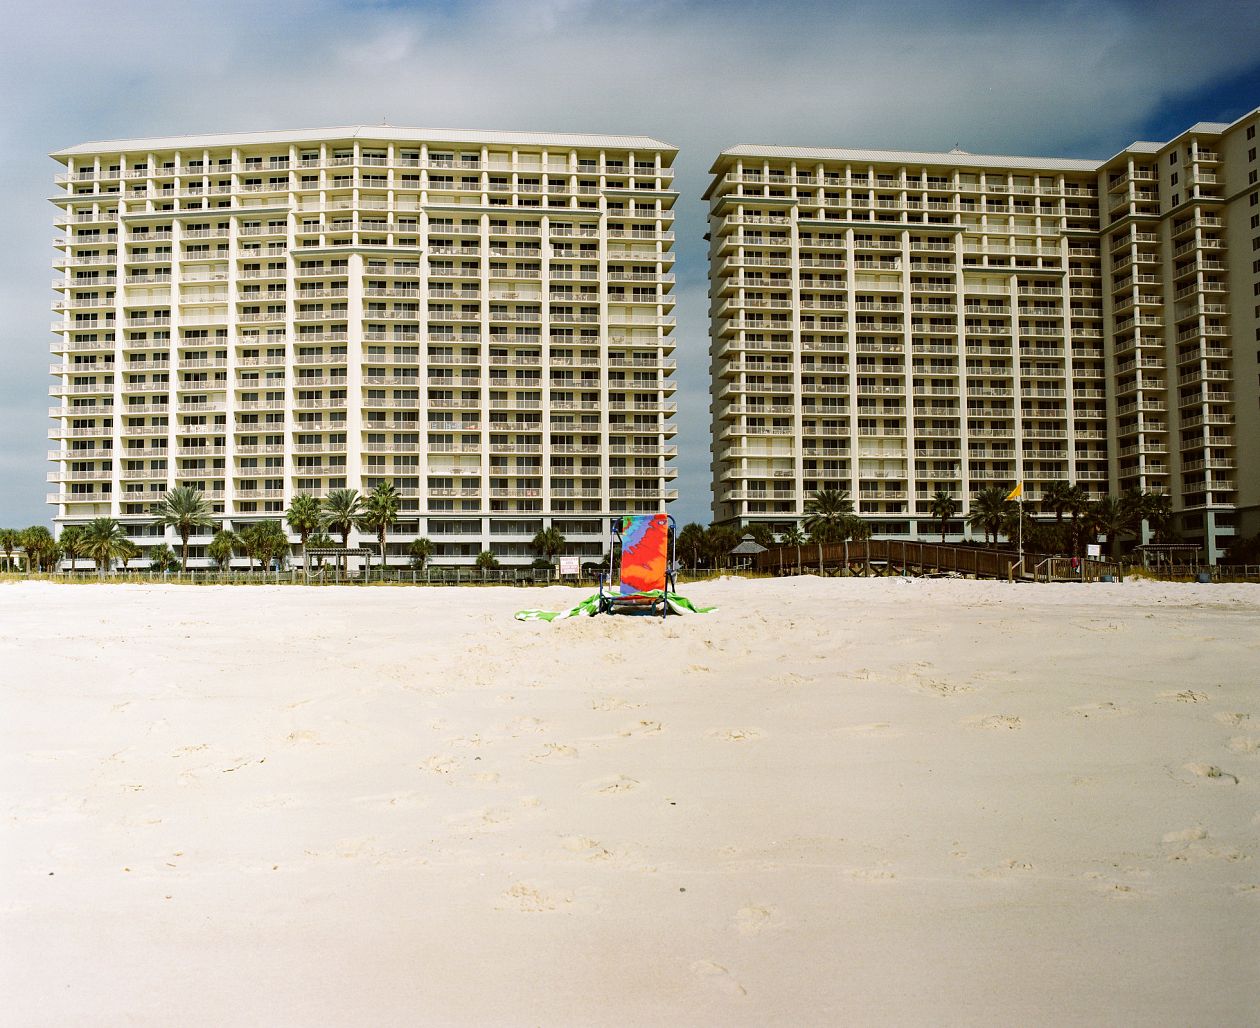 Surfers and hotels on the beach in Mobile, Alabama.